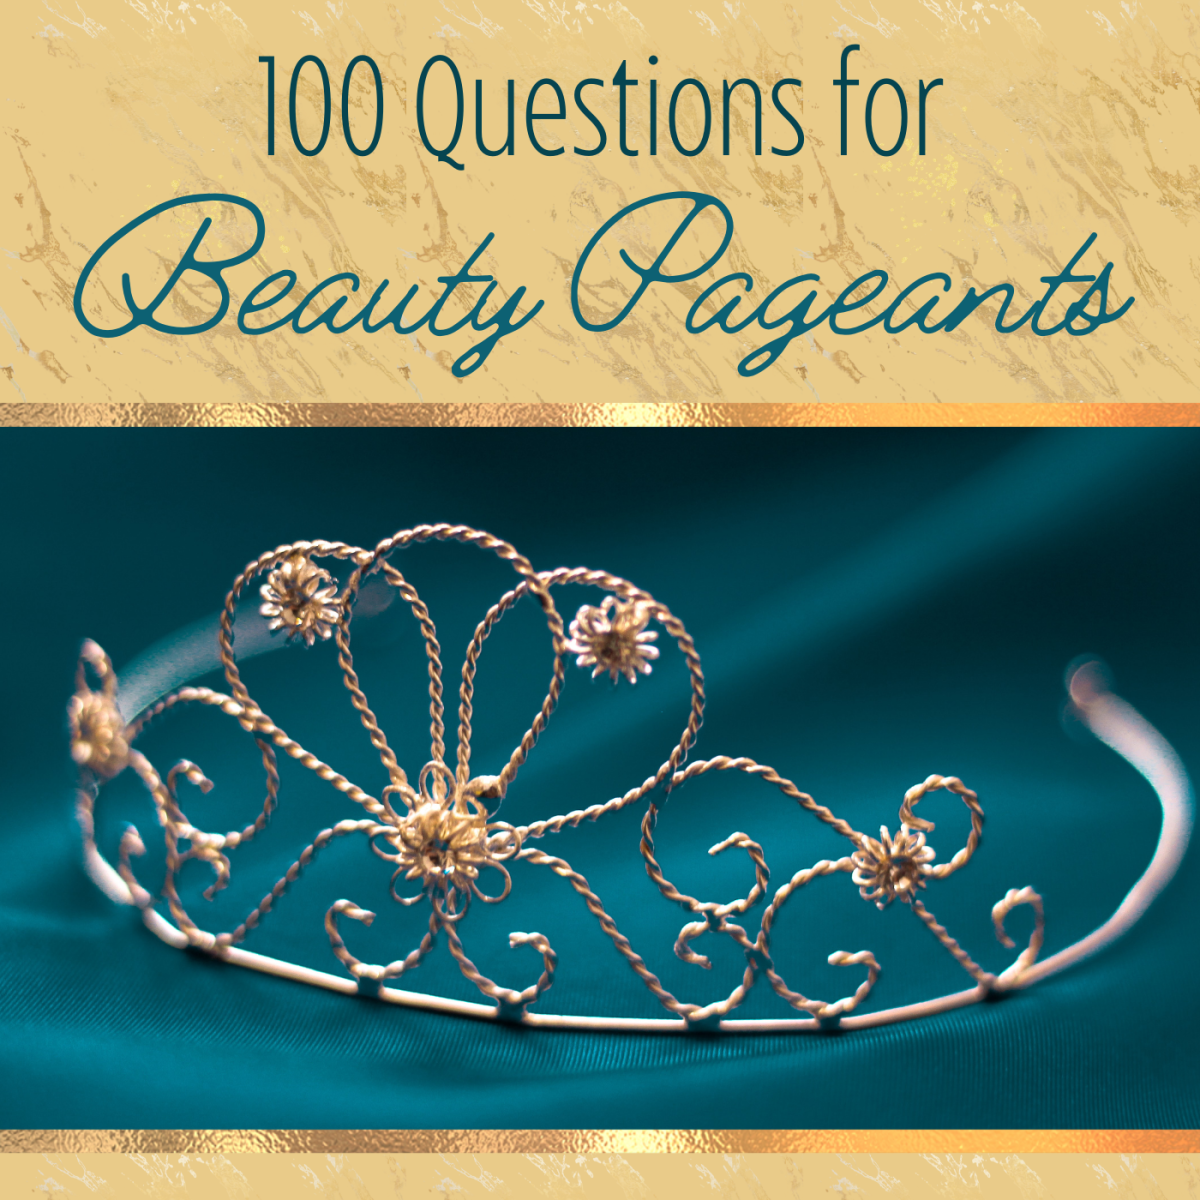 If you want to win a beauty pageant, be prepared to answer these questions!